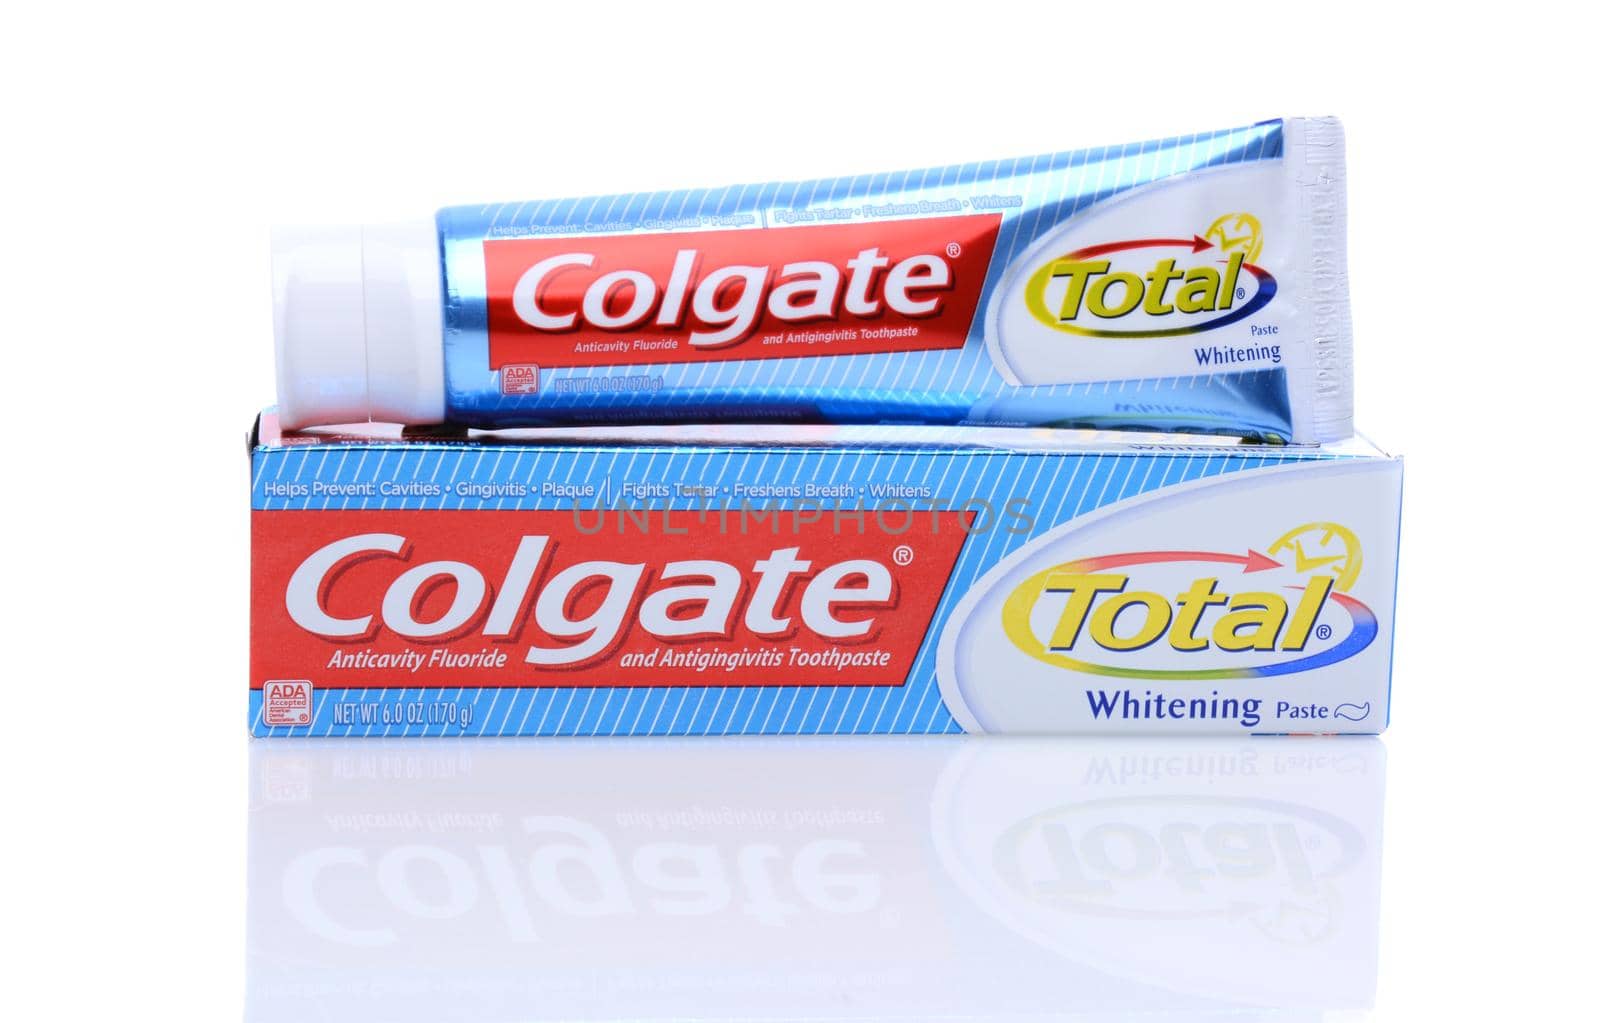 IRVINE, CA - May 14, 2014: A 6oz tube of Colgate Total Toothpaste. Colgate, a sub-brand of Colgate-Palmolive, is an oral hygiene product line of toothpastes, toothbrushes, mouthwashes and dental floss. 